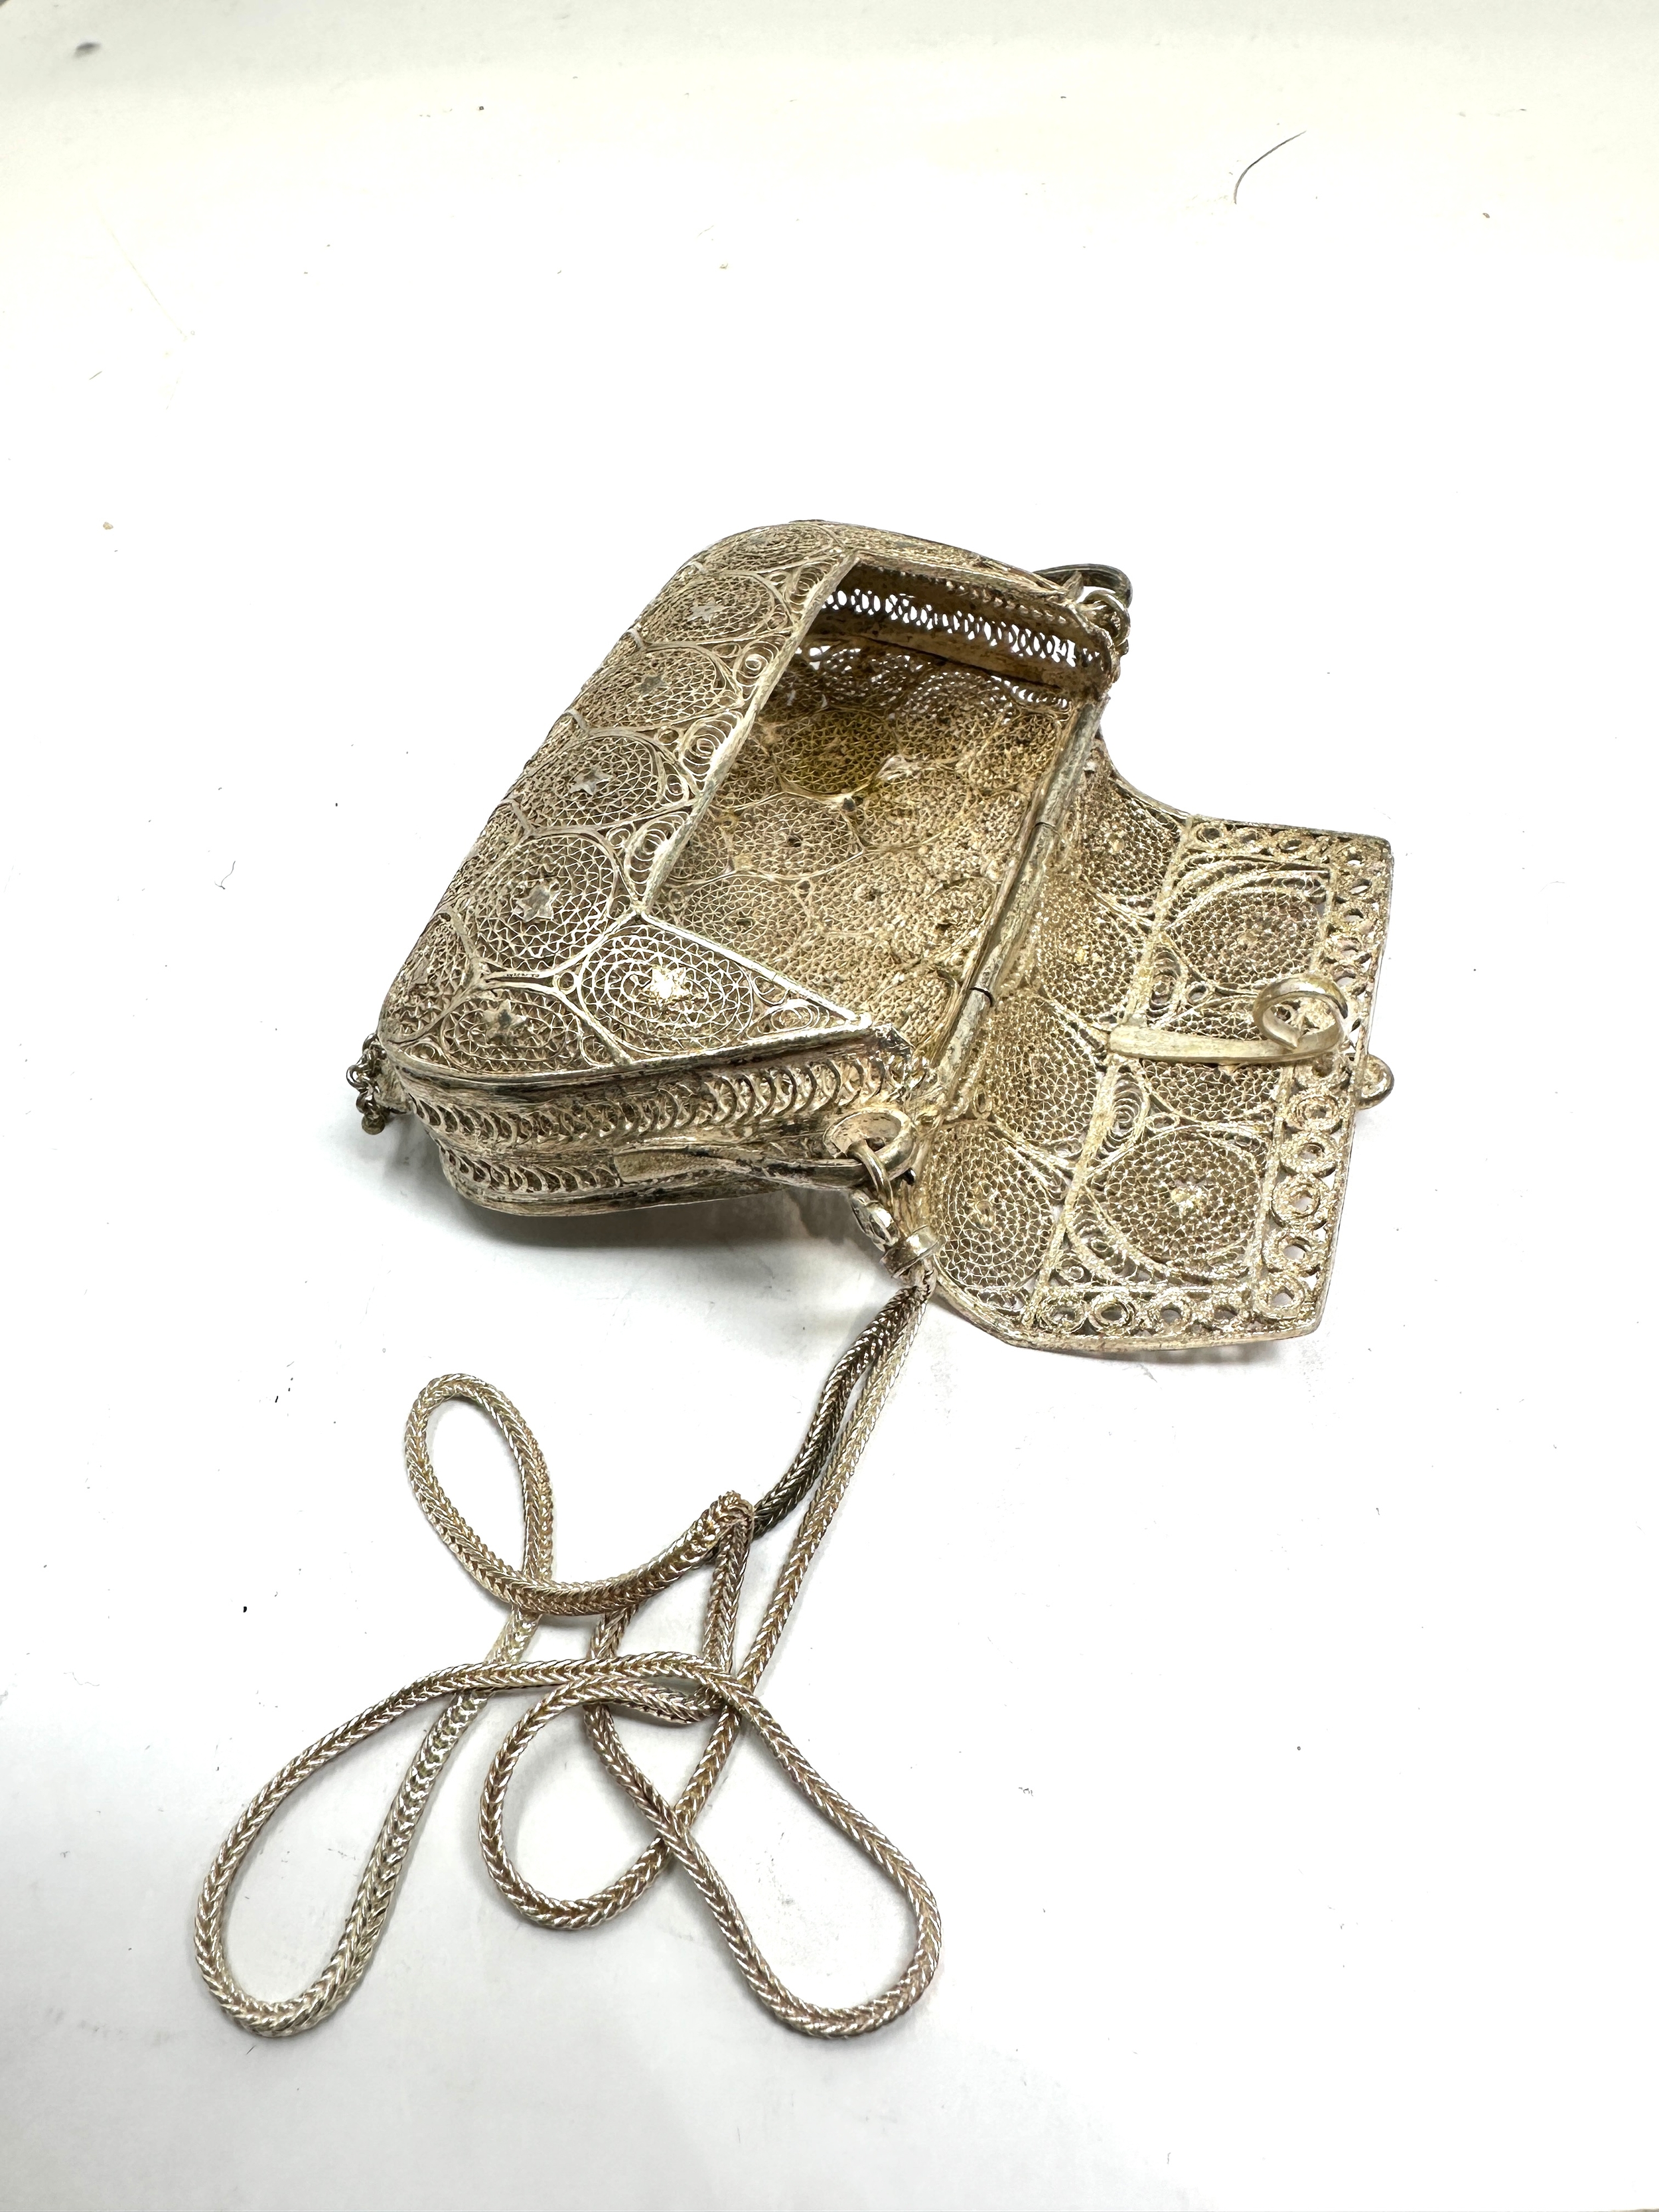 Silver Filigree Purse Bag marked BJI xrt tested as 925 silver weight 123g - Image 5 of 5